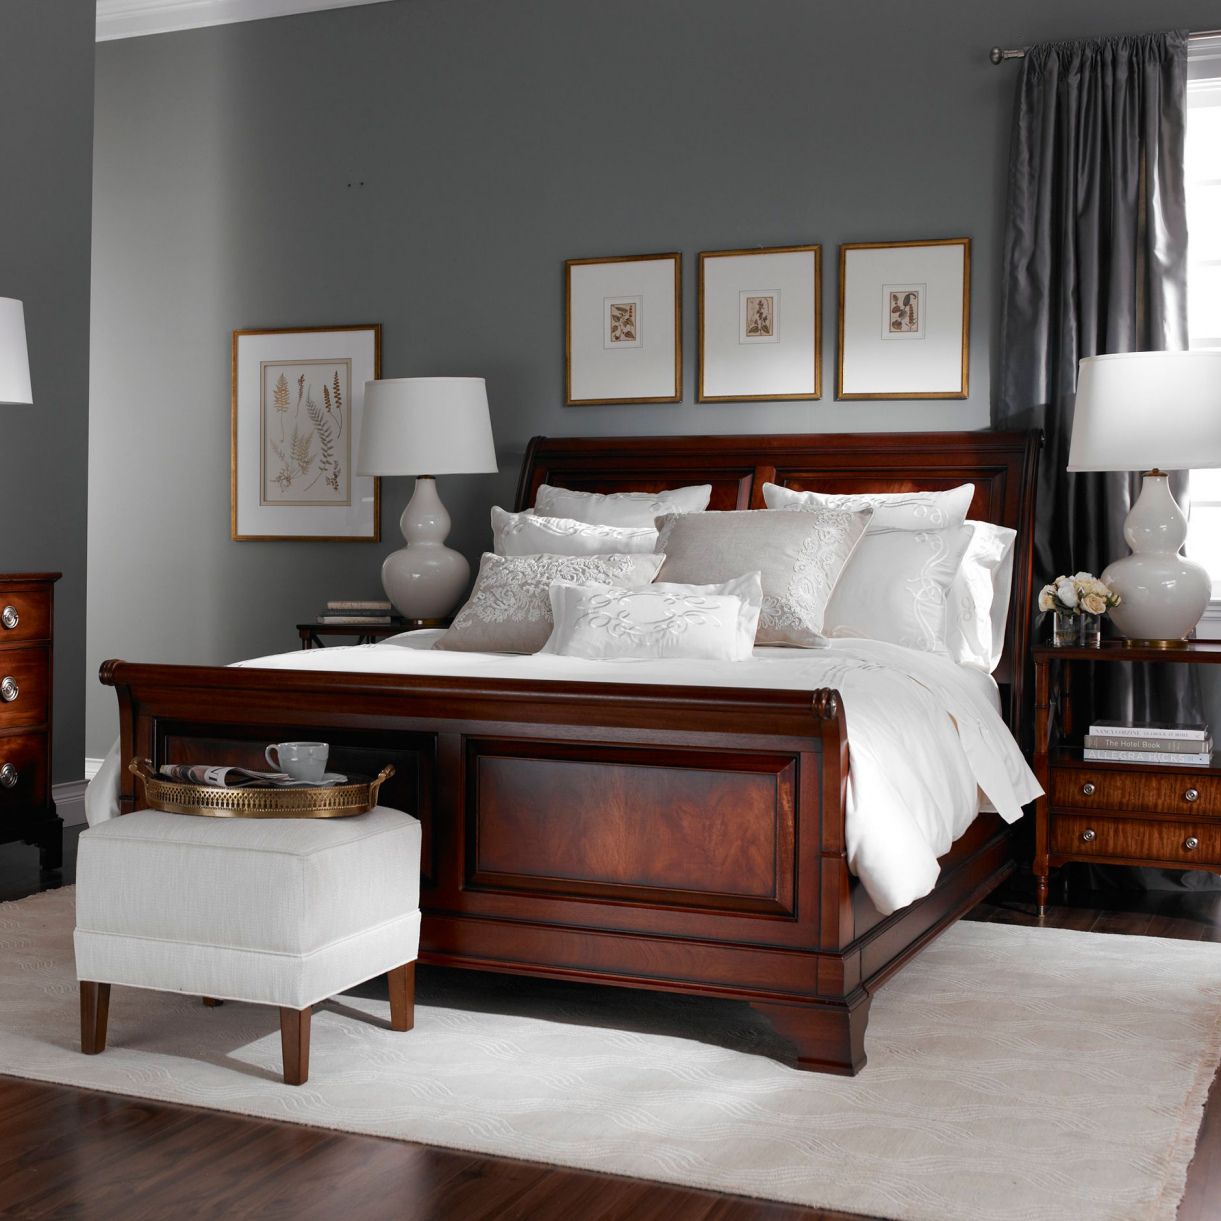 Elegant and Timeless: The Beauty of
Cherry Wood Bedroom Furniture